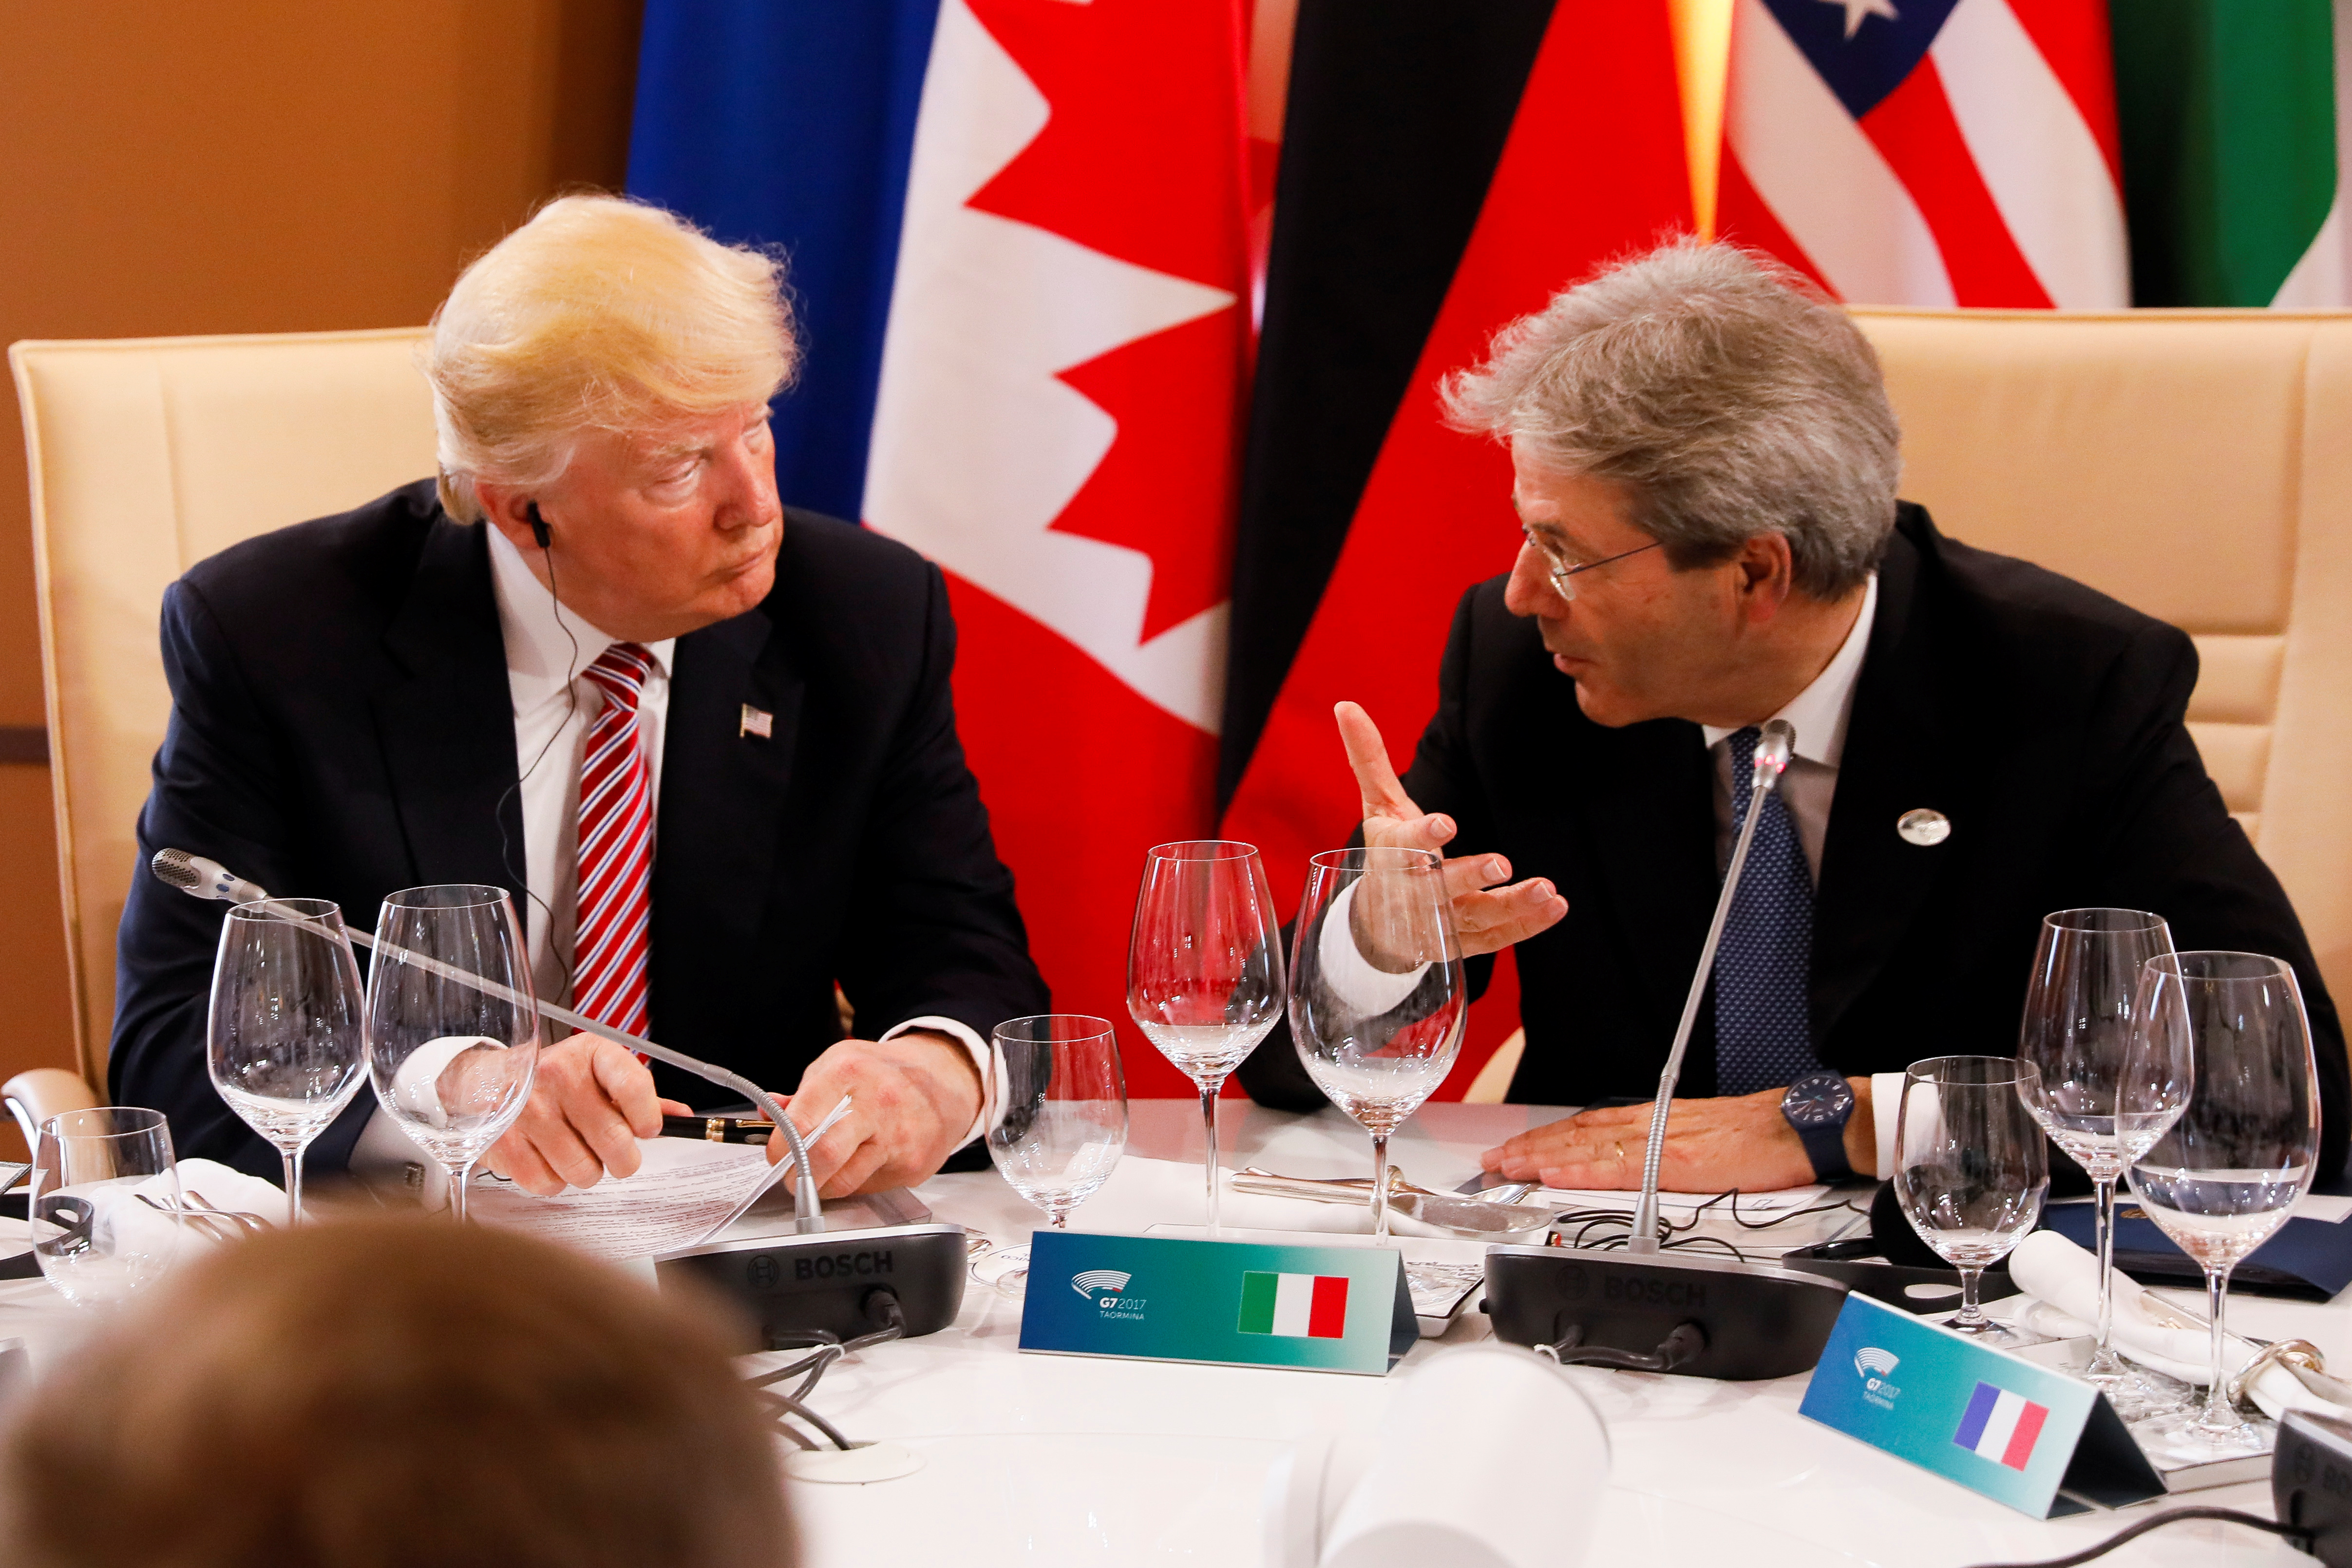 U.S. President Donald Trump (L) listens to Italian Prime Minister Paolo Gentiloni as they sit around a table during the G7 Summit in Taormina, Sicily, Italy, May 26, 2017. REUTERS/Jonathan Ernst